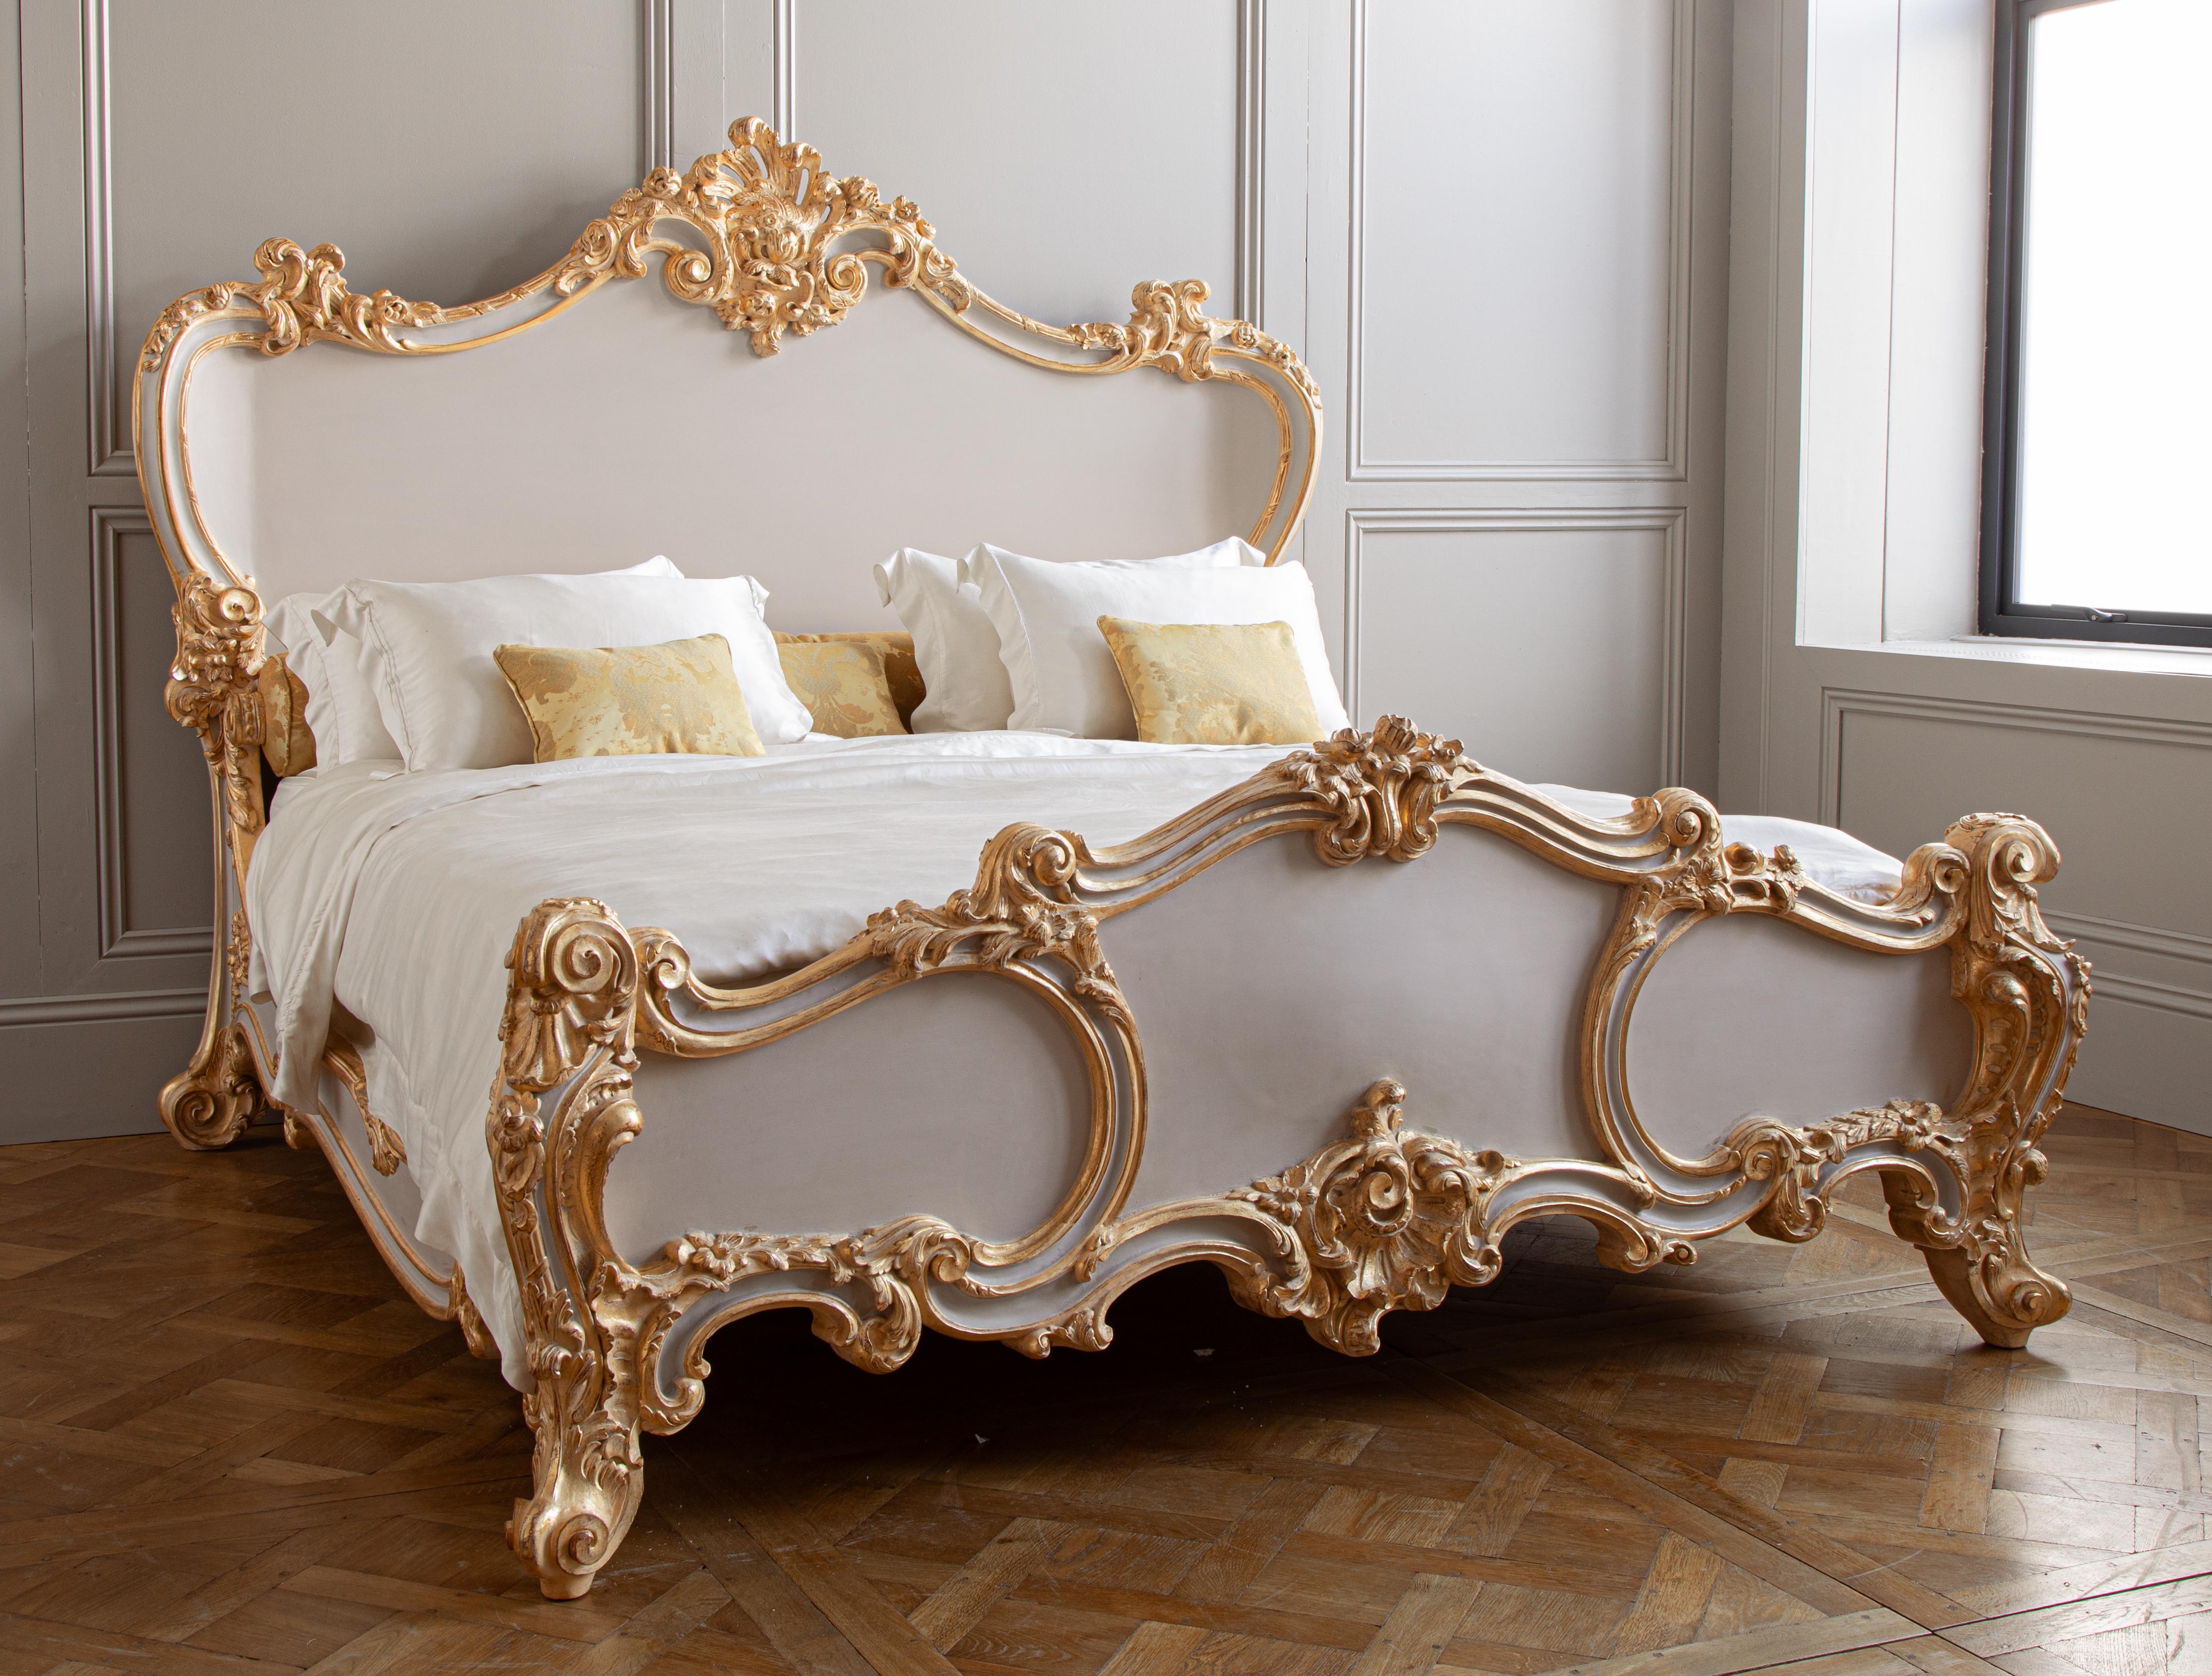 Rococo The Cherub Bed By La Maison London With Gold Highlights - UK Super King For Sale